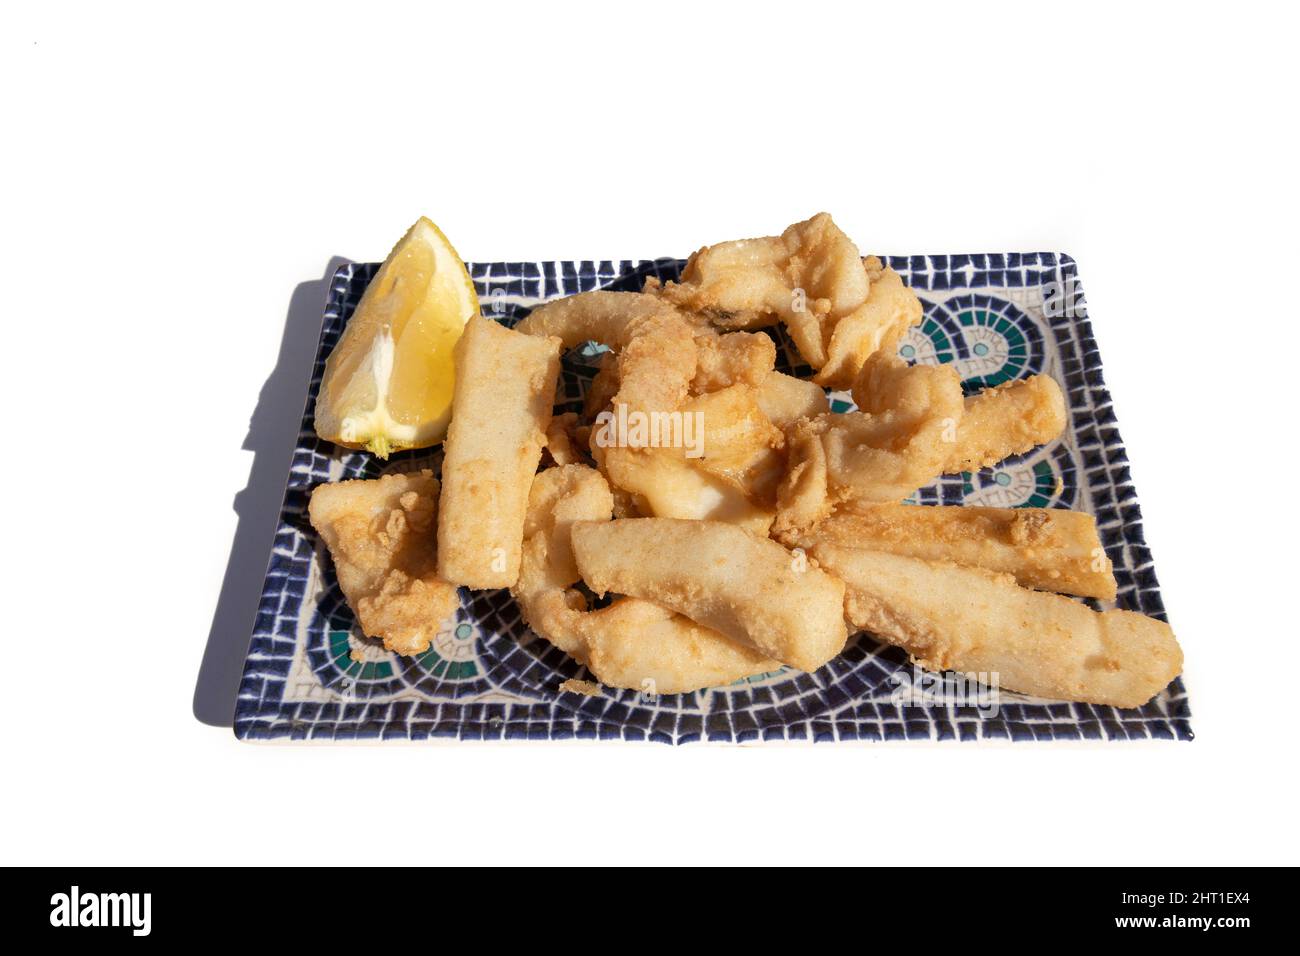 Fried cuttlefish strips, called Chocos Fritos in Spanish. Served on a decorative rectangular plate. Spanish food concept. Stock Photo